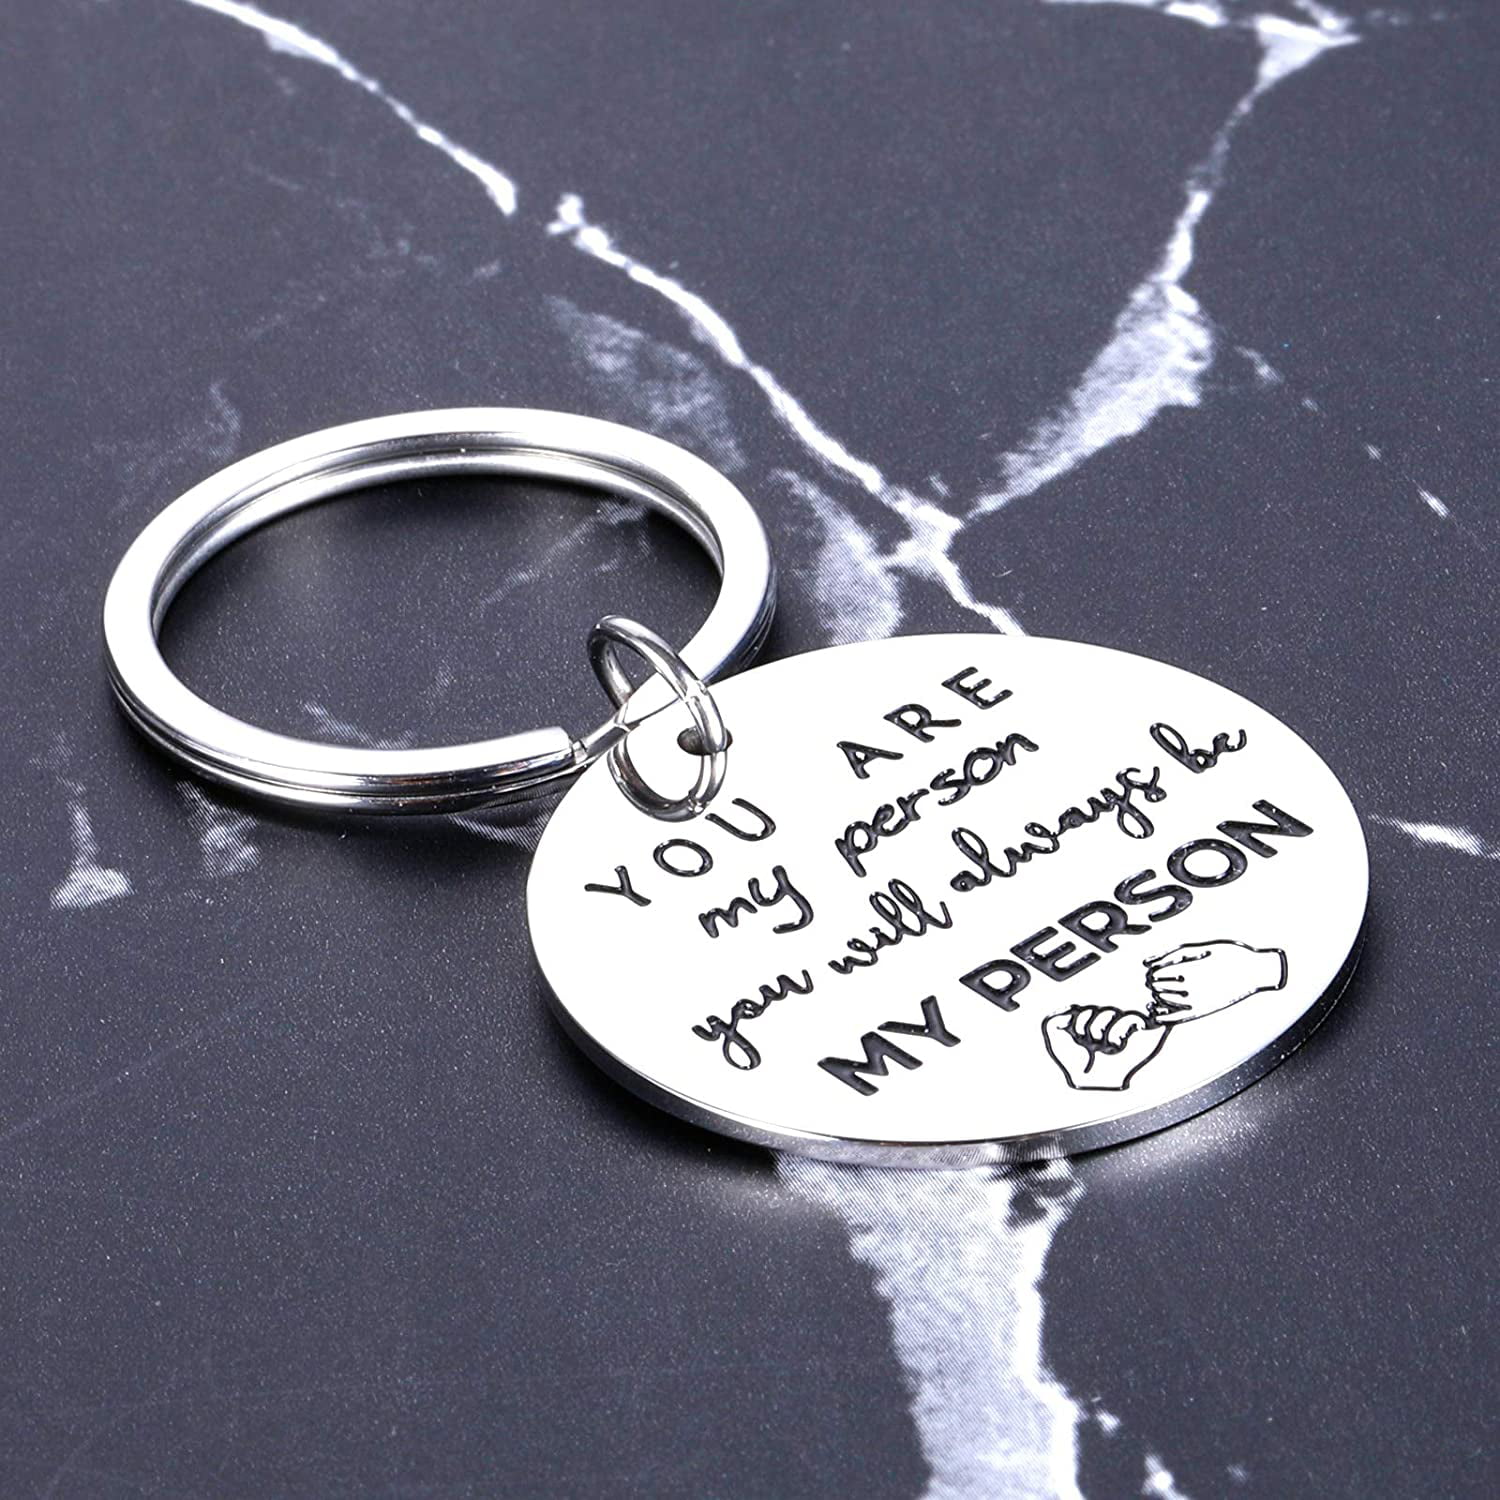 Greys Anatomy Merchandise You're My Person Keychain Gifts You are My Person Gift for Best Friend Women Bff Keychain 2 